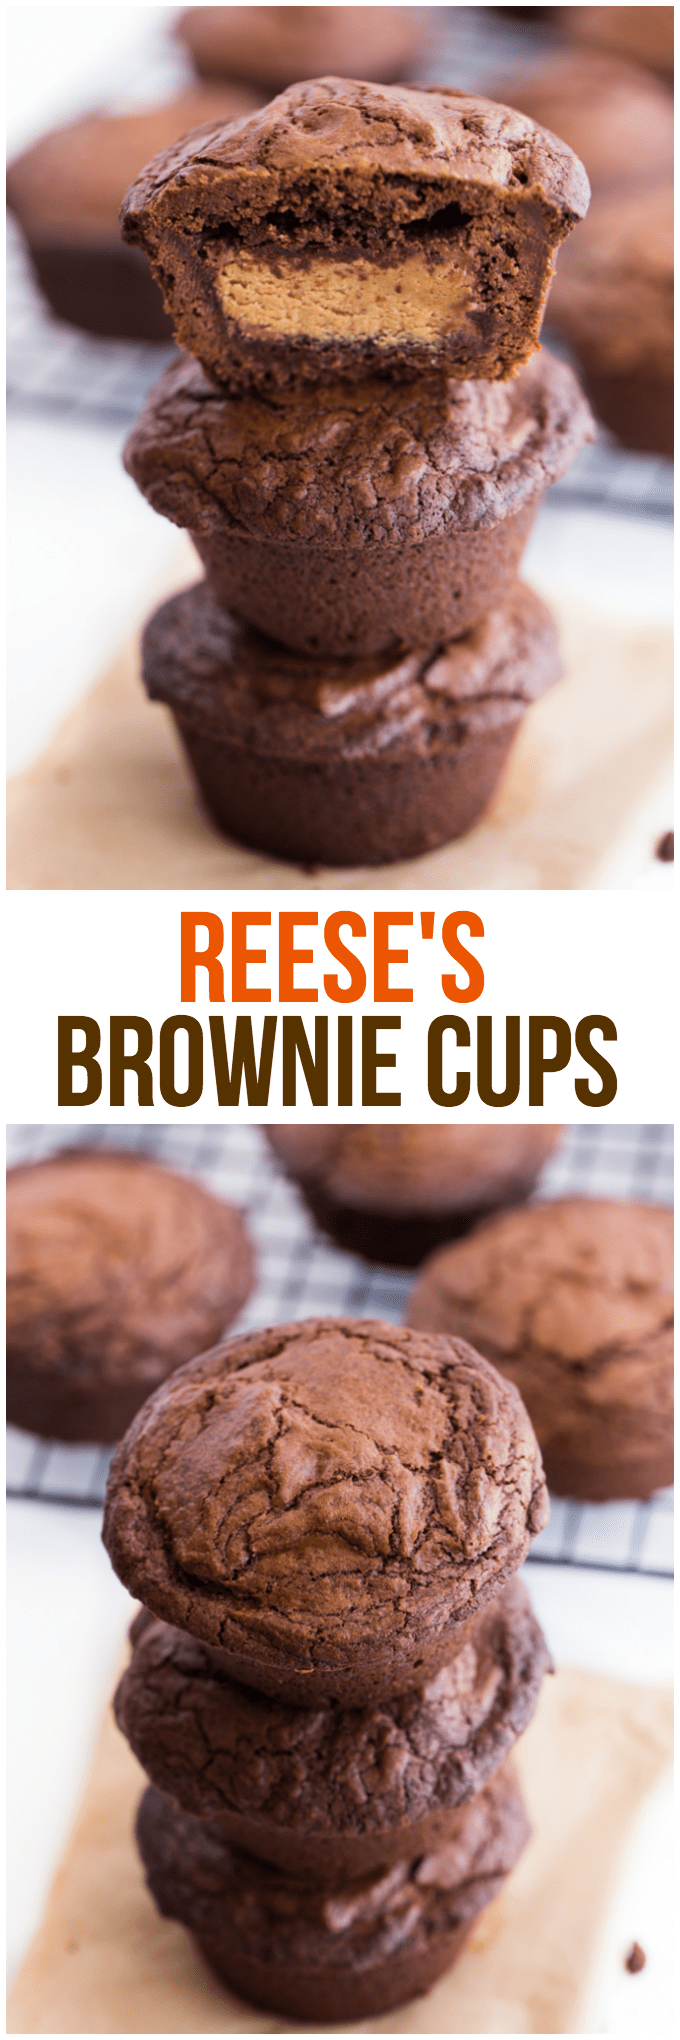 Reese's Stuffed Brownies - Giant Reese's Peanut Butter Cups are stuffed inside a rich chocolate brownie. Each bite is pure chocolate heaven! 